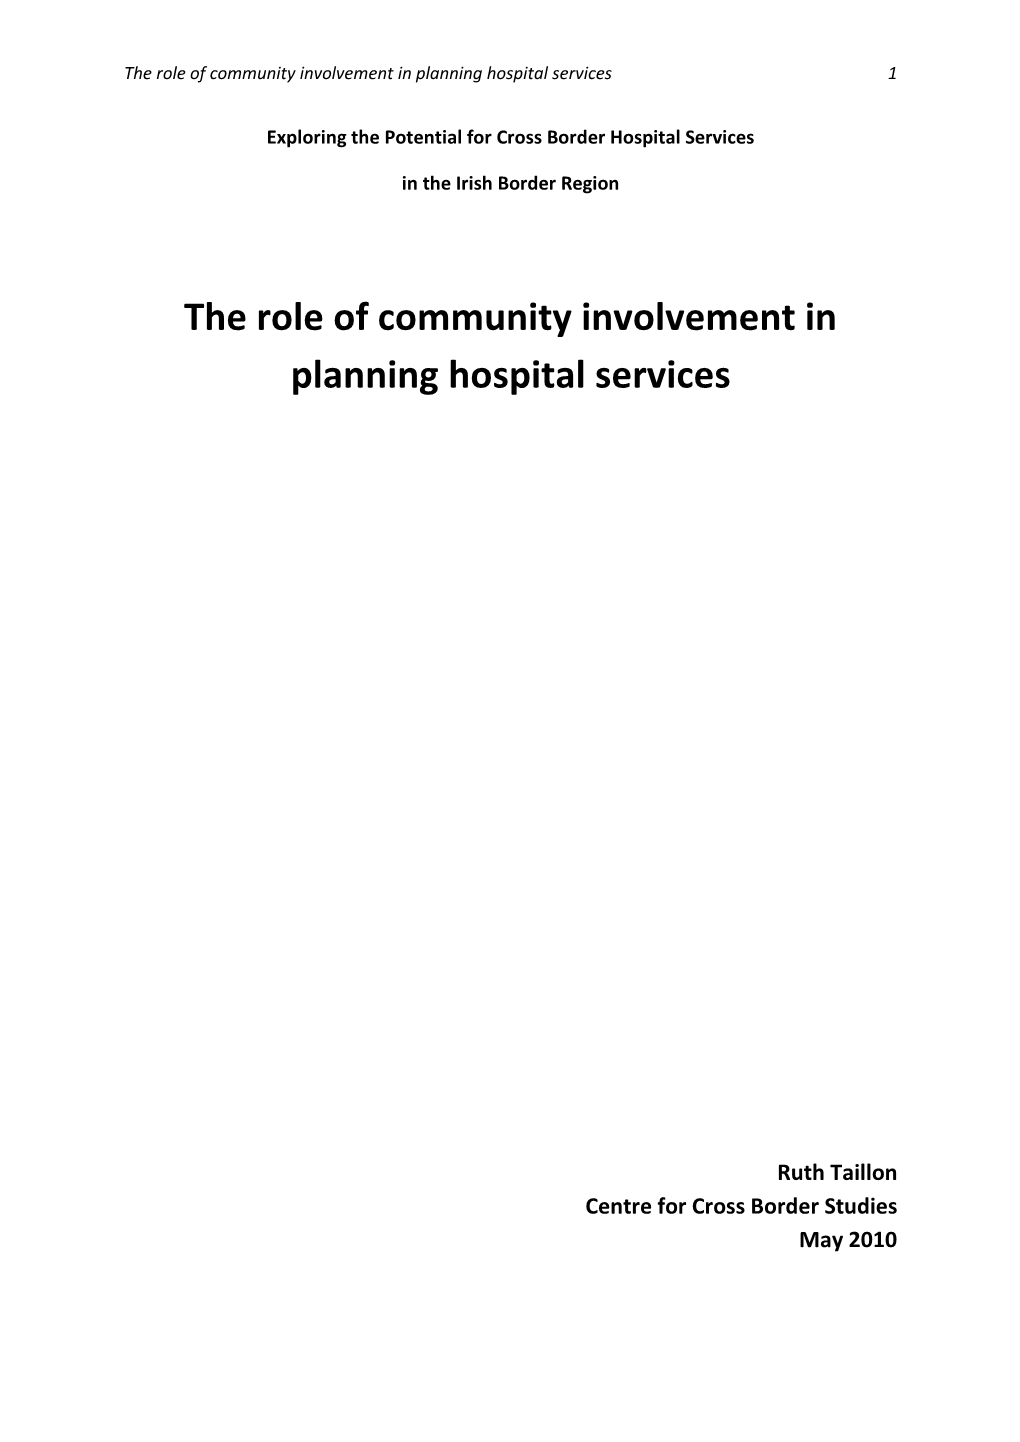 The Role of Community Involvement in Planning Hospital Services 1